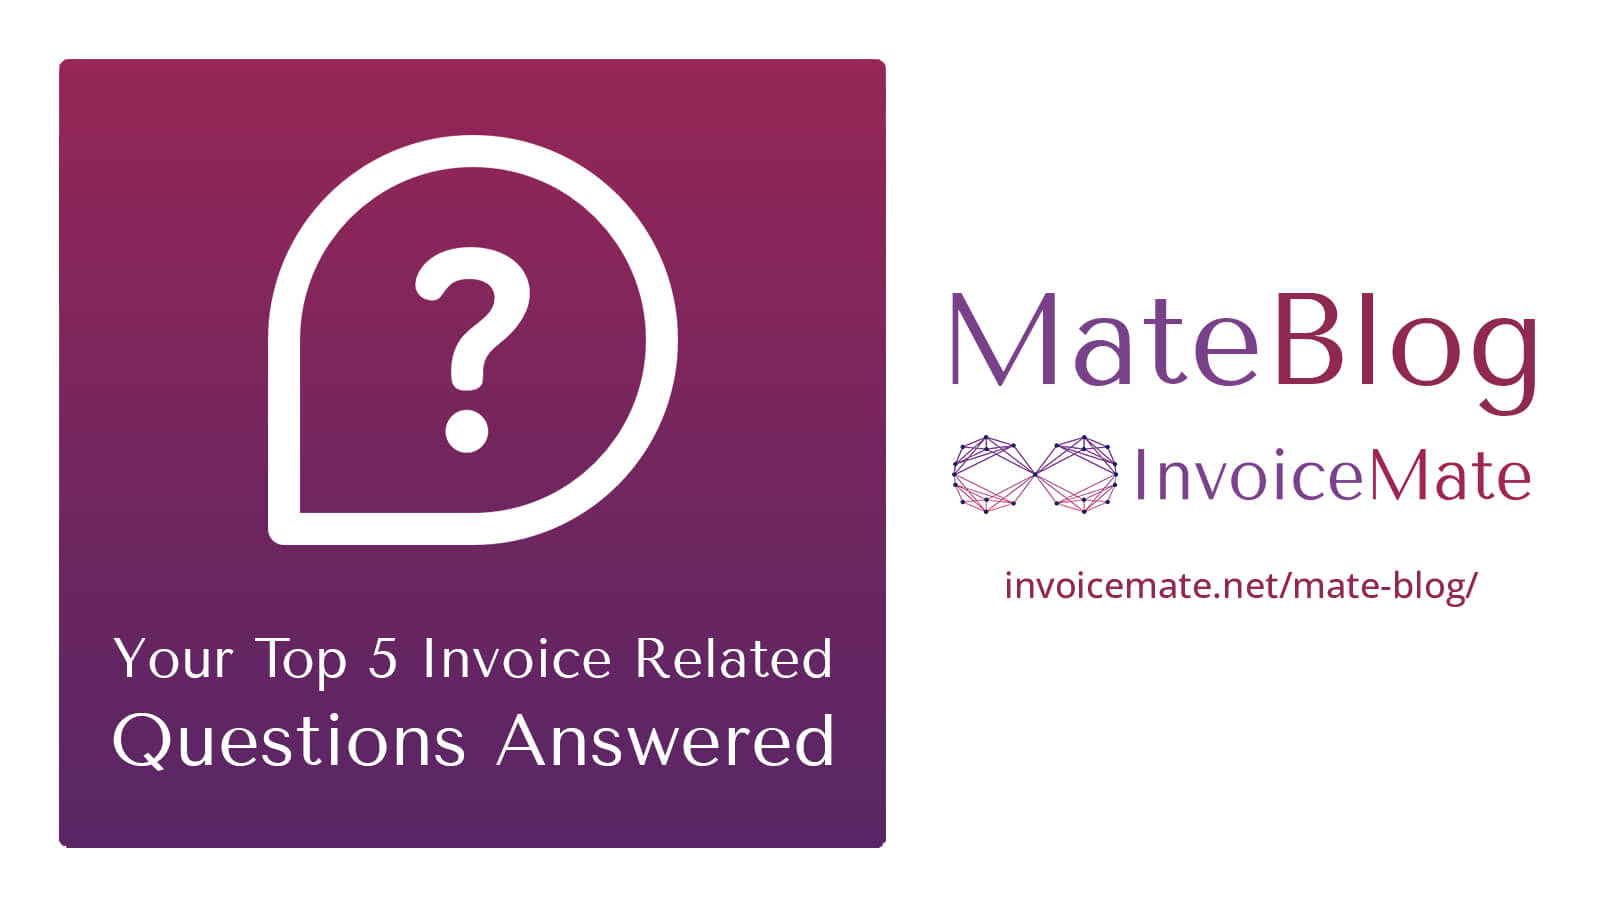 Your Top 5 Invoice Related Questions Answered